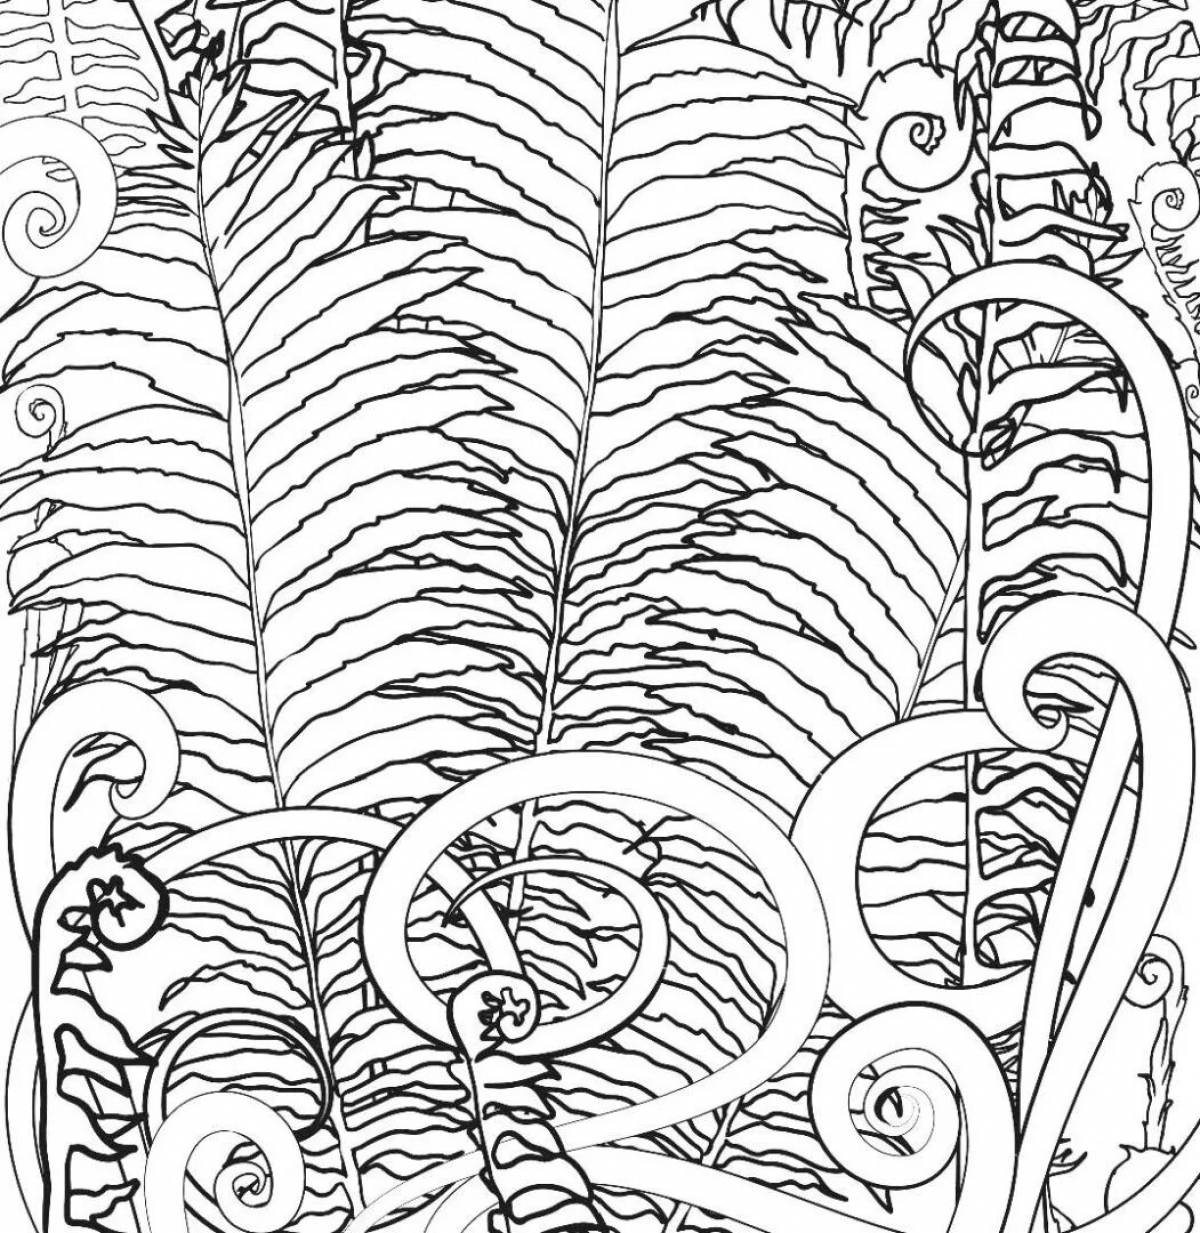 Serendipitous coloring page anti-stress forest